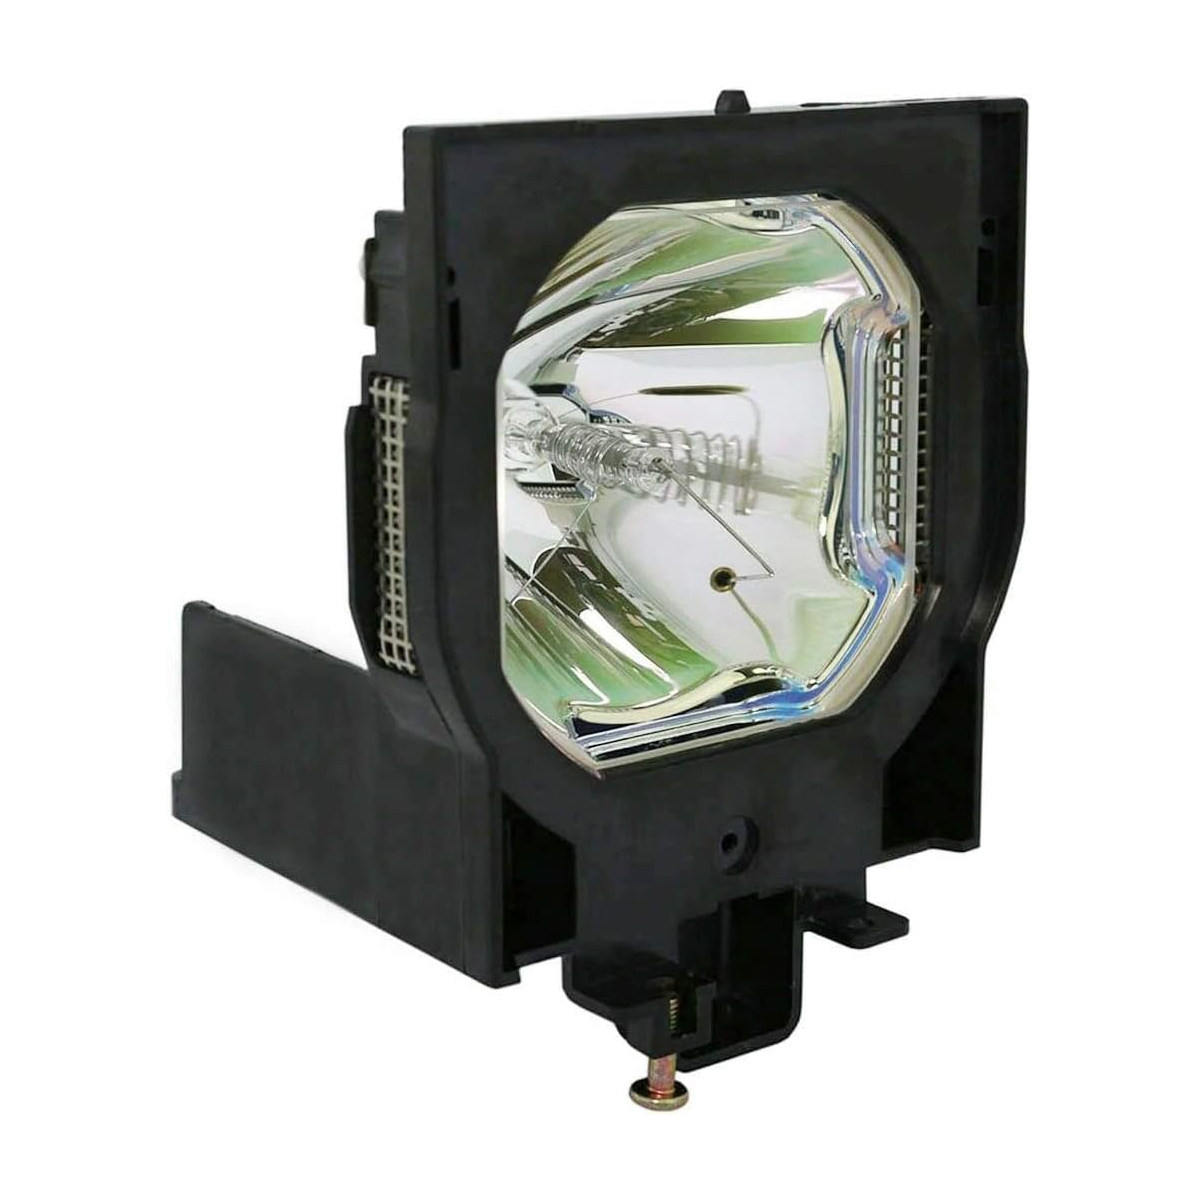 Replacement Projector lamp POA-LMP72 For Sanyo PLC-HD10 PLV-HD10 PLV-HD100